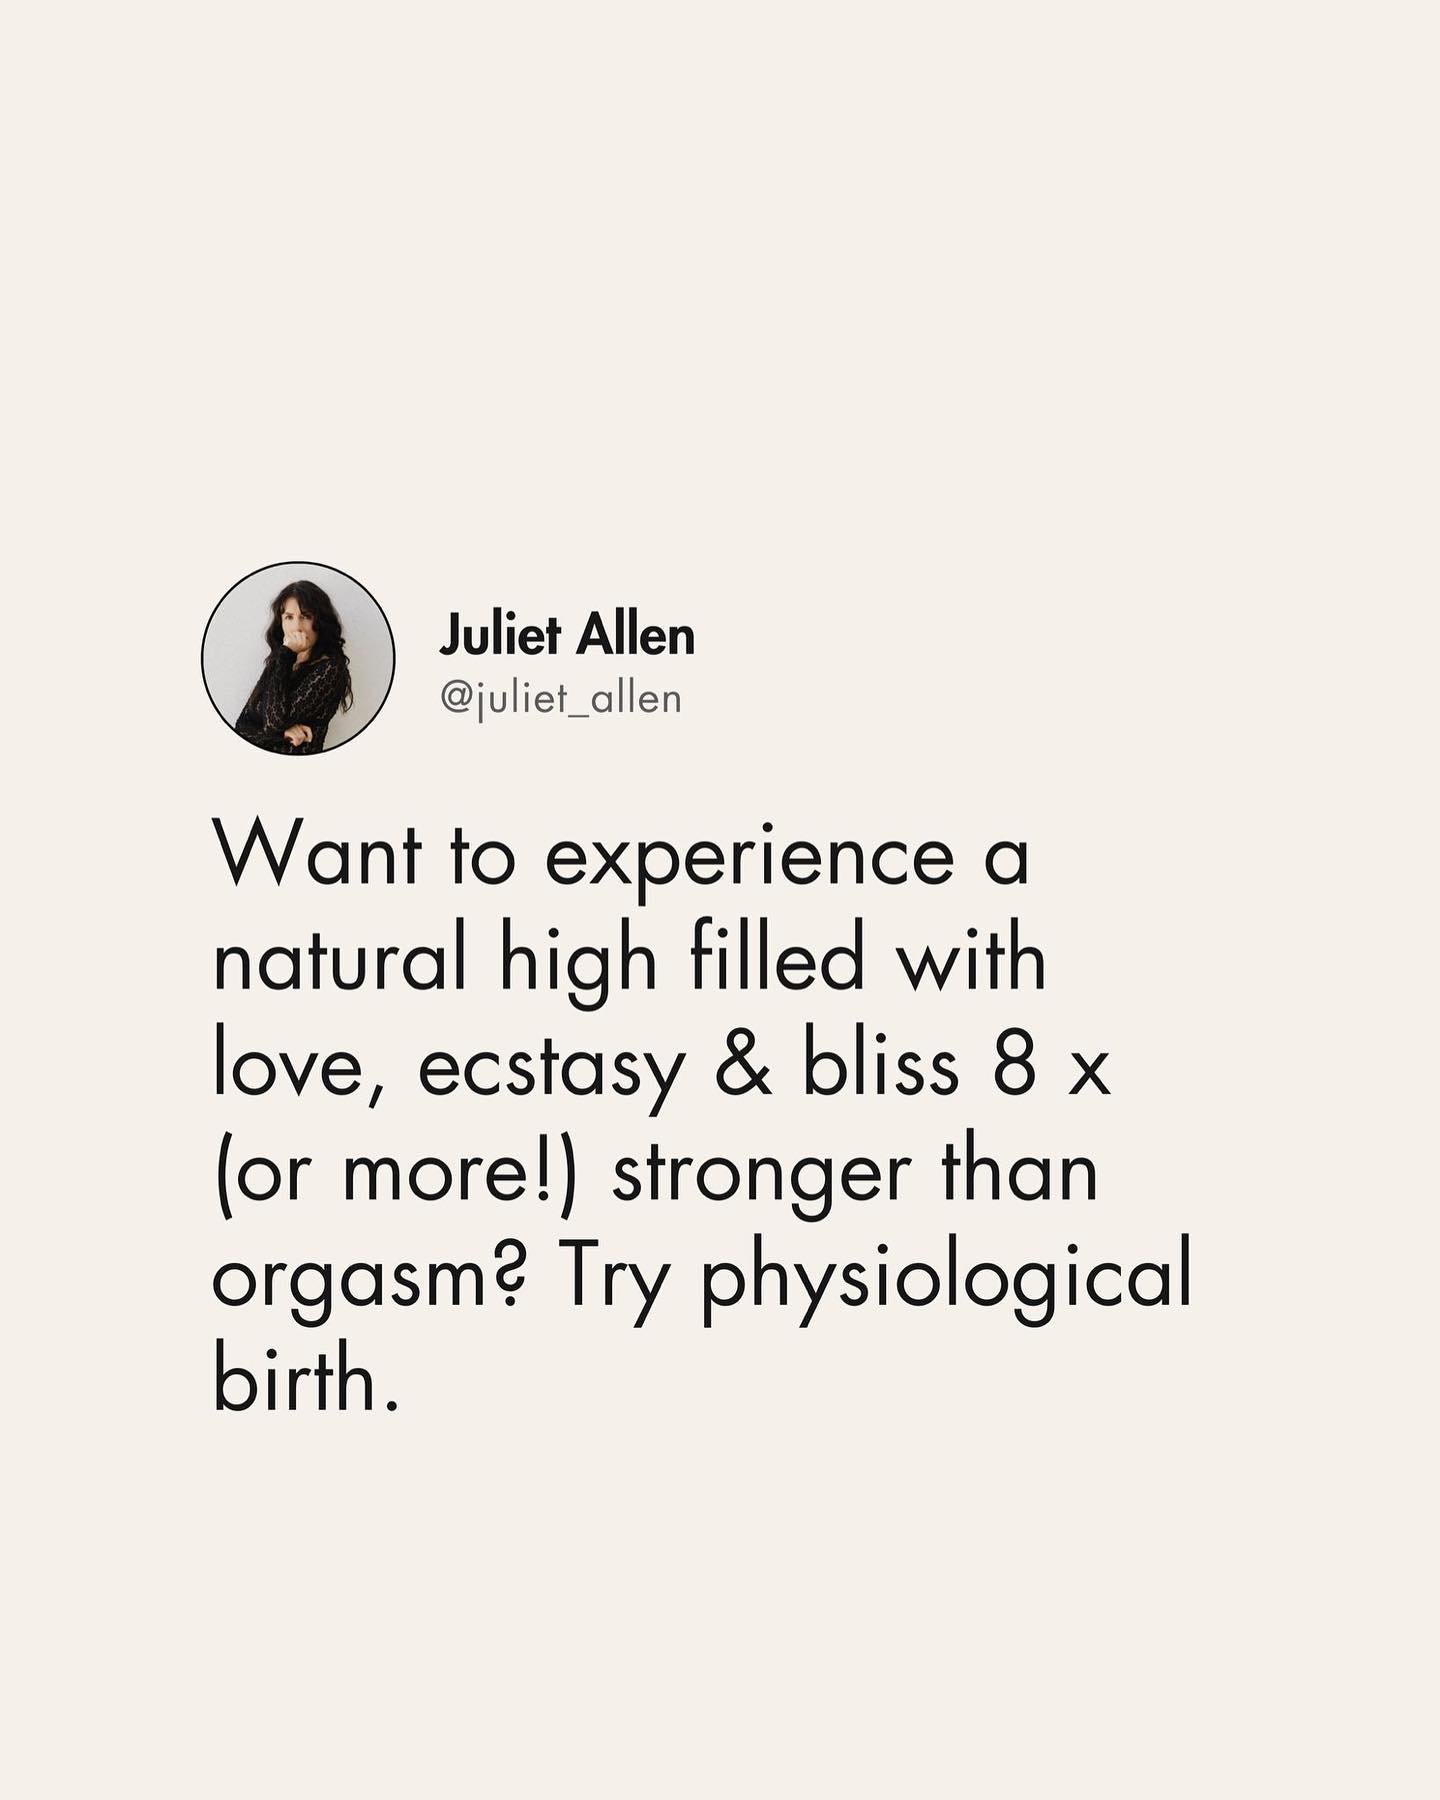 The natural high and surges of ecstatic energy that I have felt during and after physiological birth are unlike any orgasm I have ever experienced ⚡️😳🔥🥰 Next level ecstasy is possible, it truly is.

The hormones of love &amp; ecstasy - oxytocin an